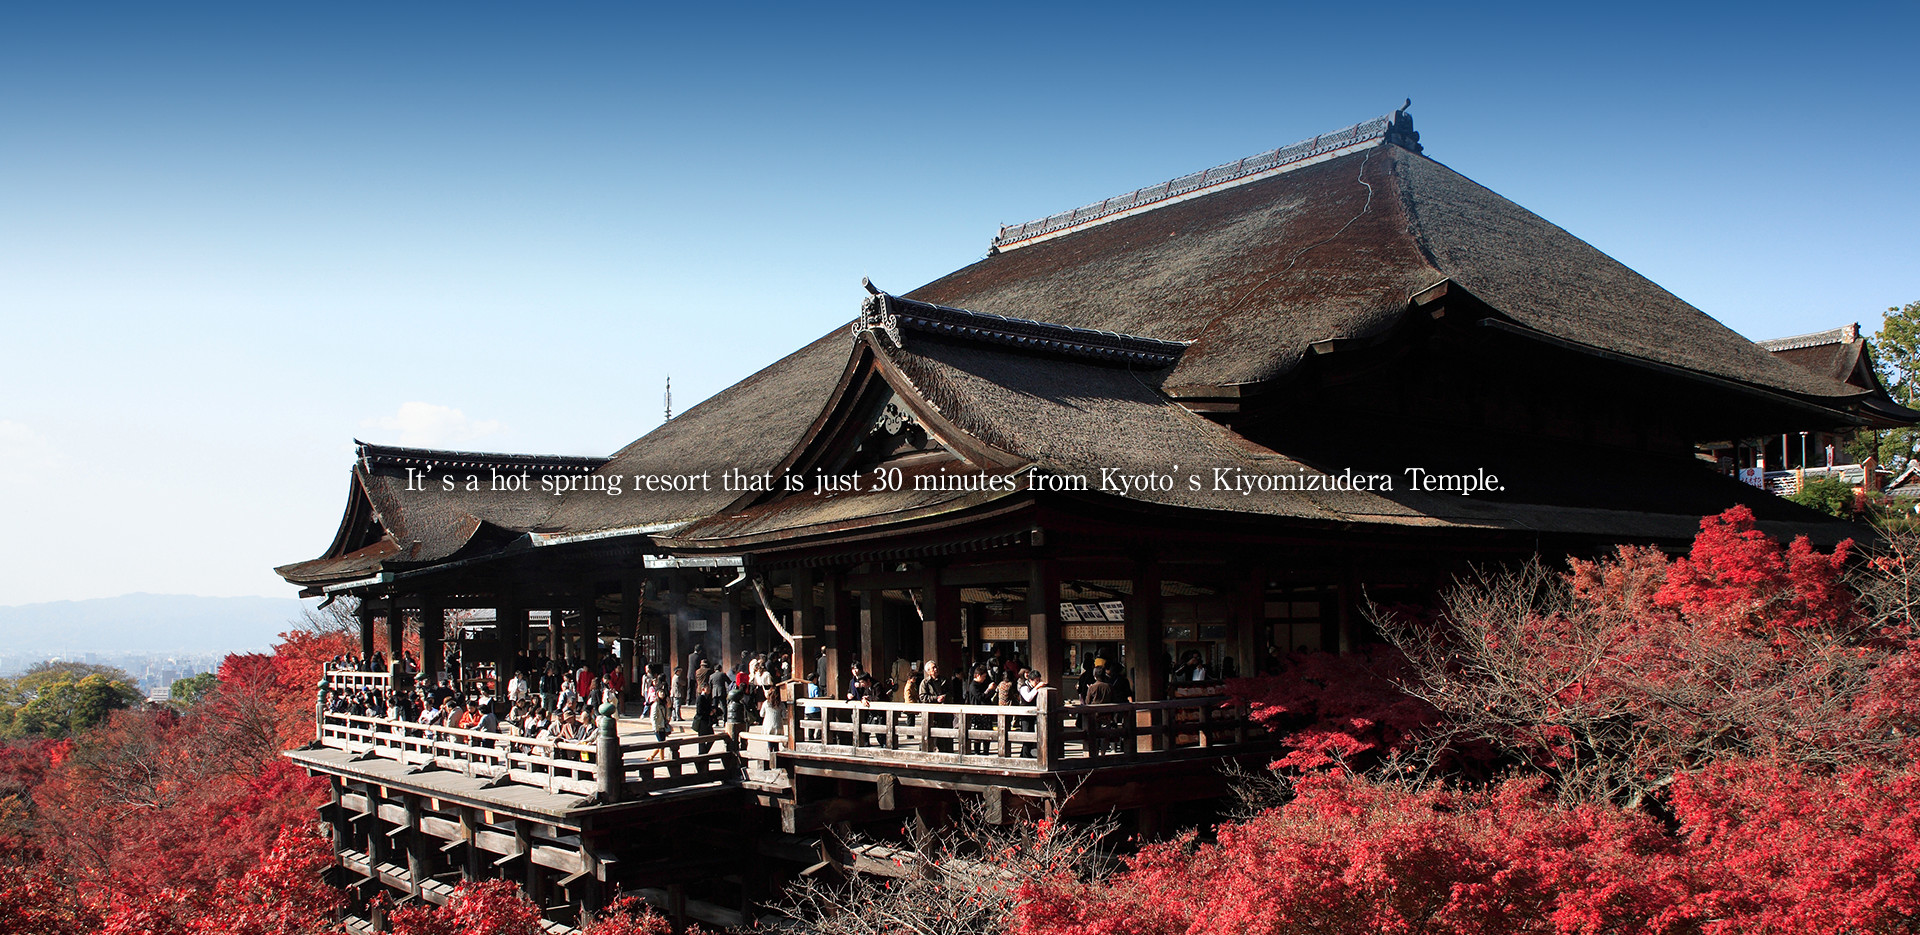 It’s a hot spring resort that is just 30 minutes from Kyoto’s Kiyomizudera Temple.